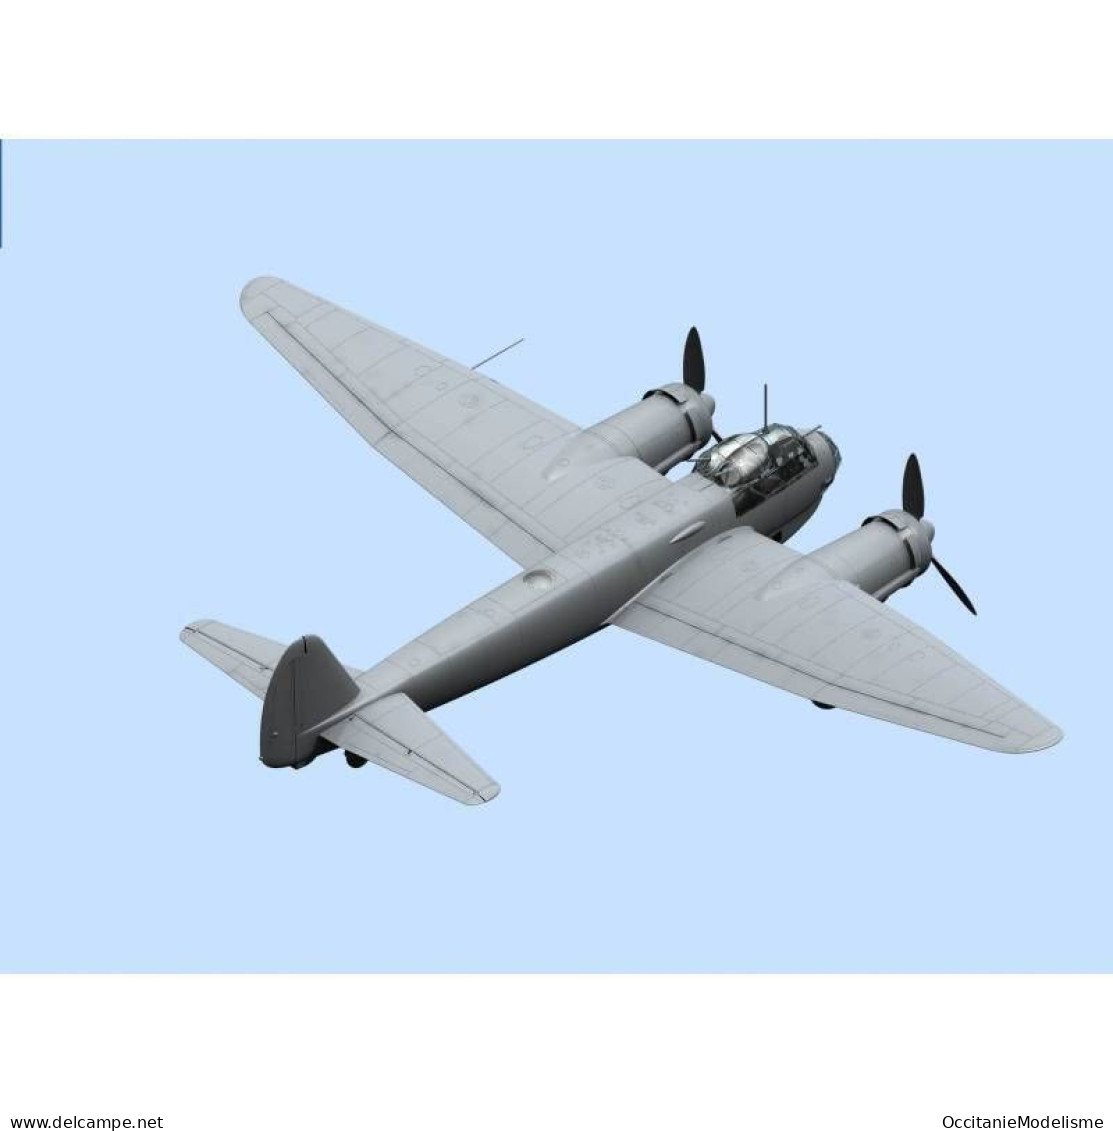 ICM - JU 88A-4 AXIS BOMBER WWII Maquette Kit Plastique Réf. 48237 Neuf NBO 1/48 - Airplanes